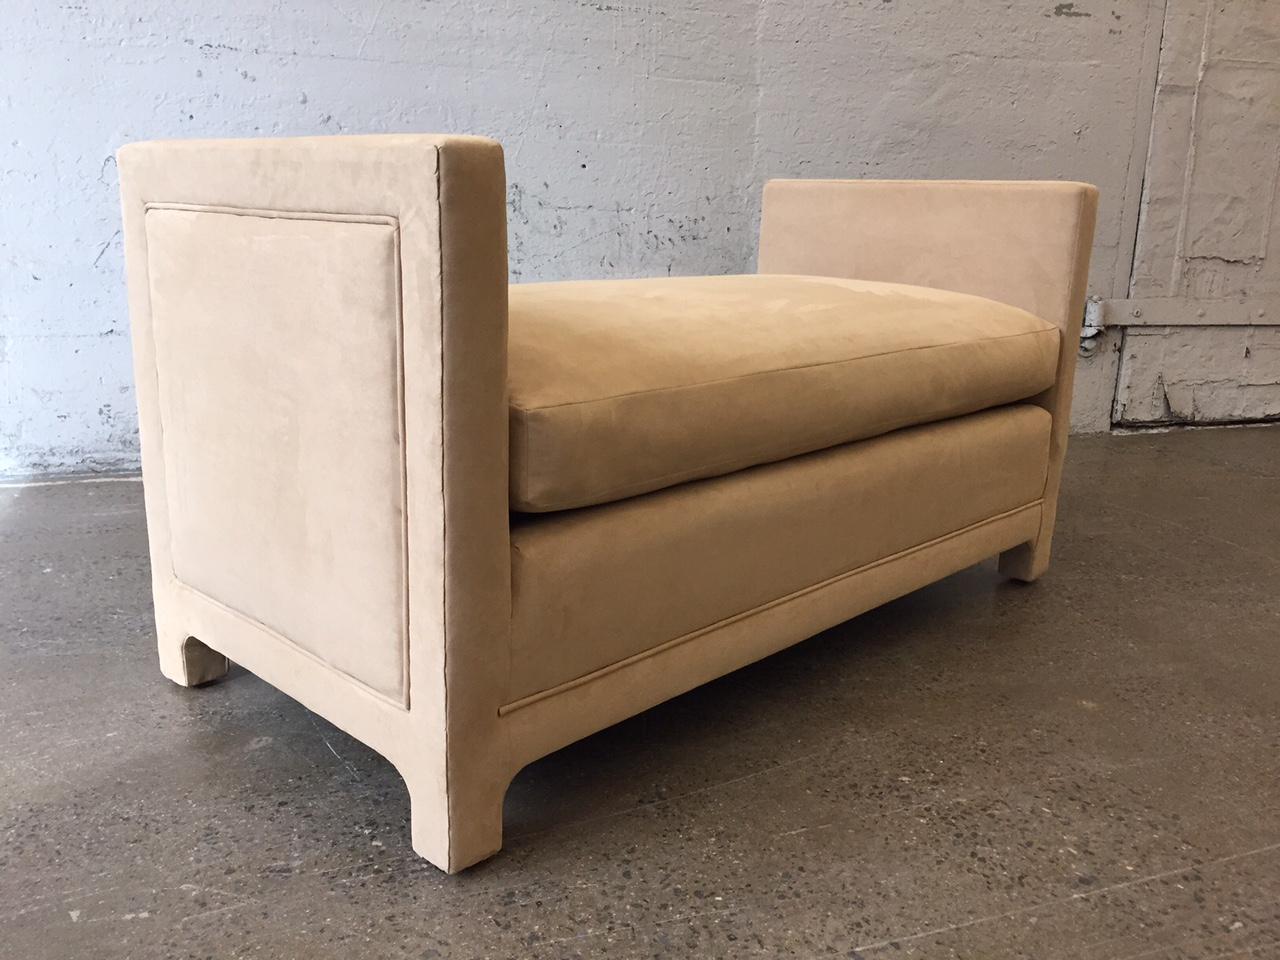 Flavor Custom Design originals oversized bench style of Milo Baughman. The bench is upholstered in an ultra-suede fabric and has a loose cushioned seat.
Part of Flavor Custom Design (FCD) furniture line.